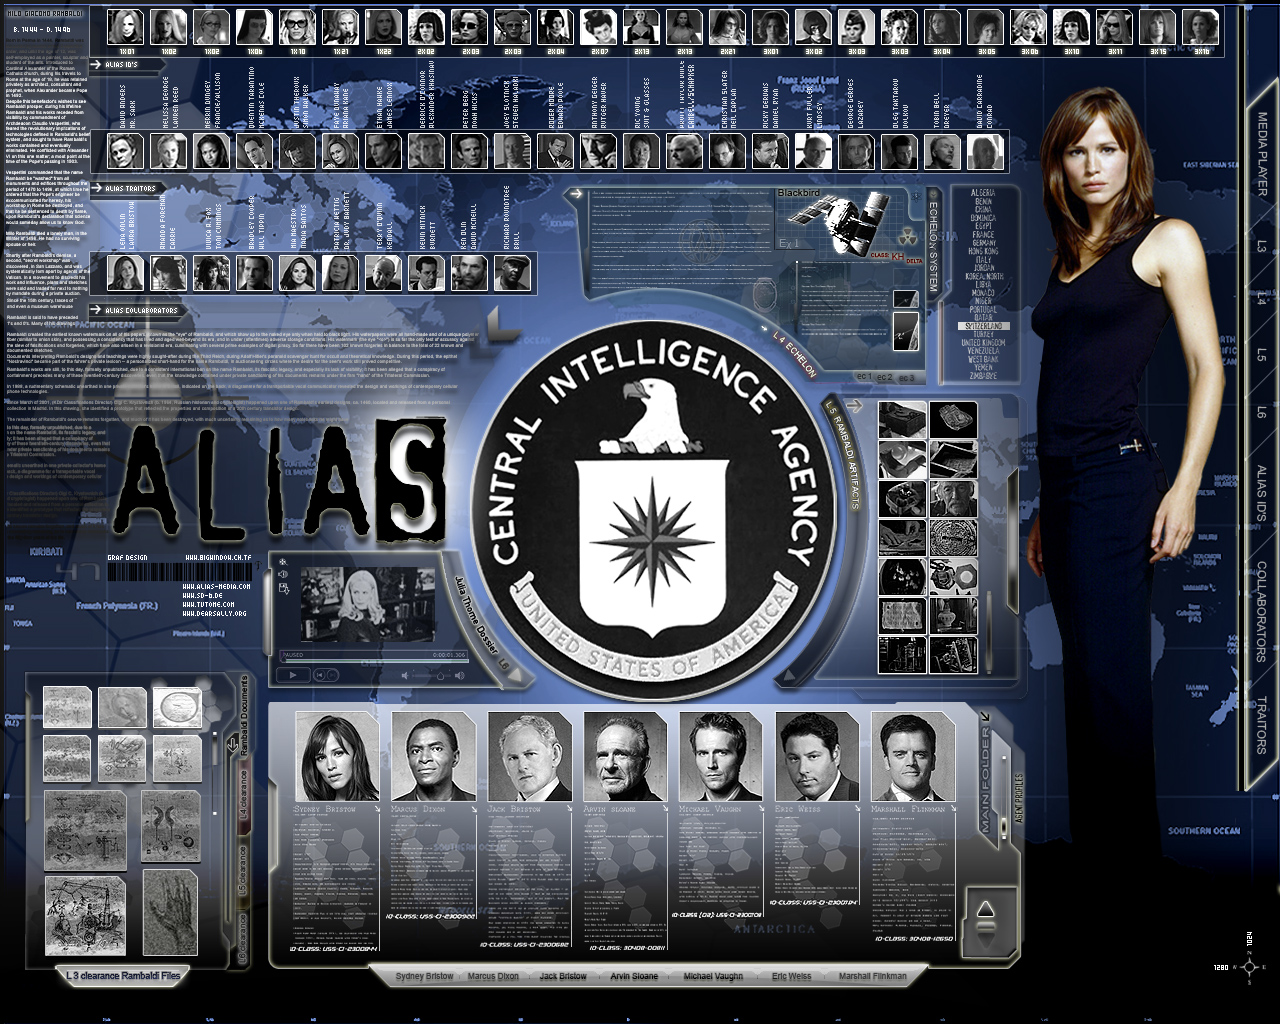 Alias Poster Gallery5 | Tv Series Posters and Cast